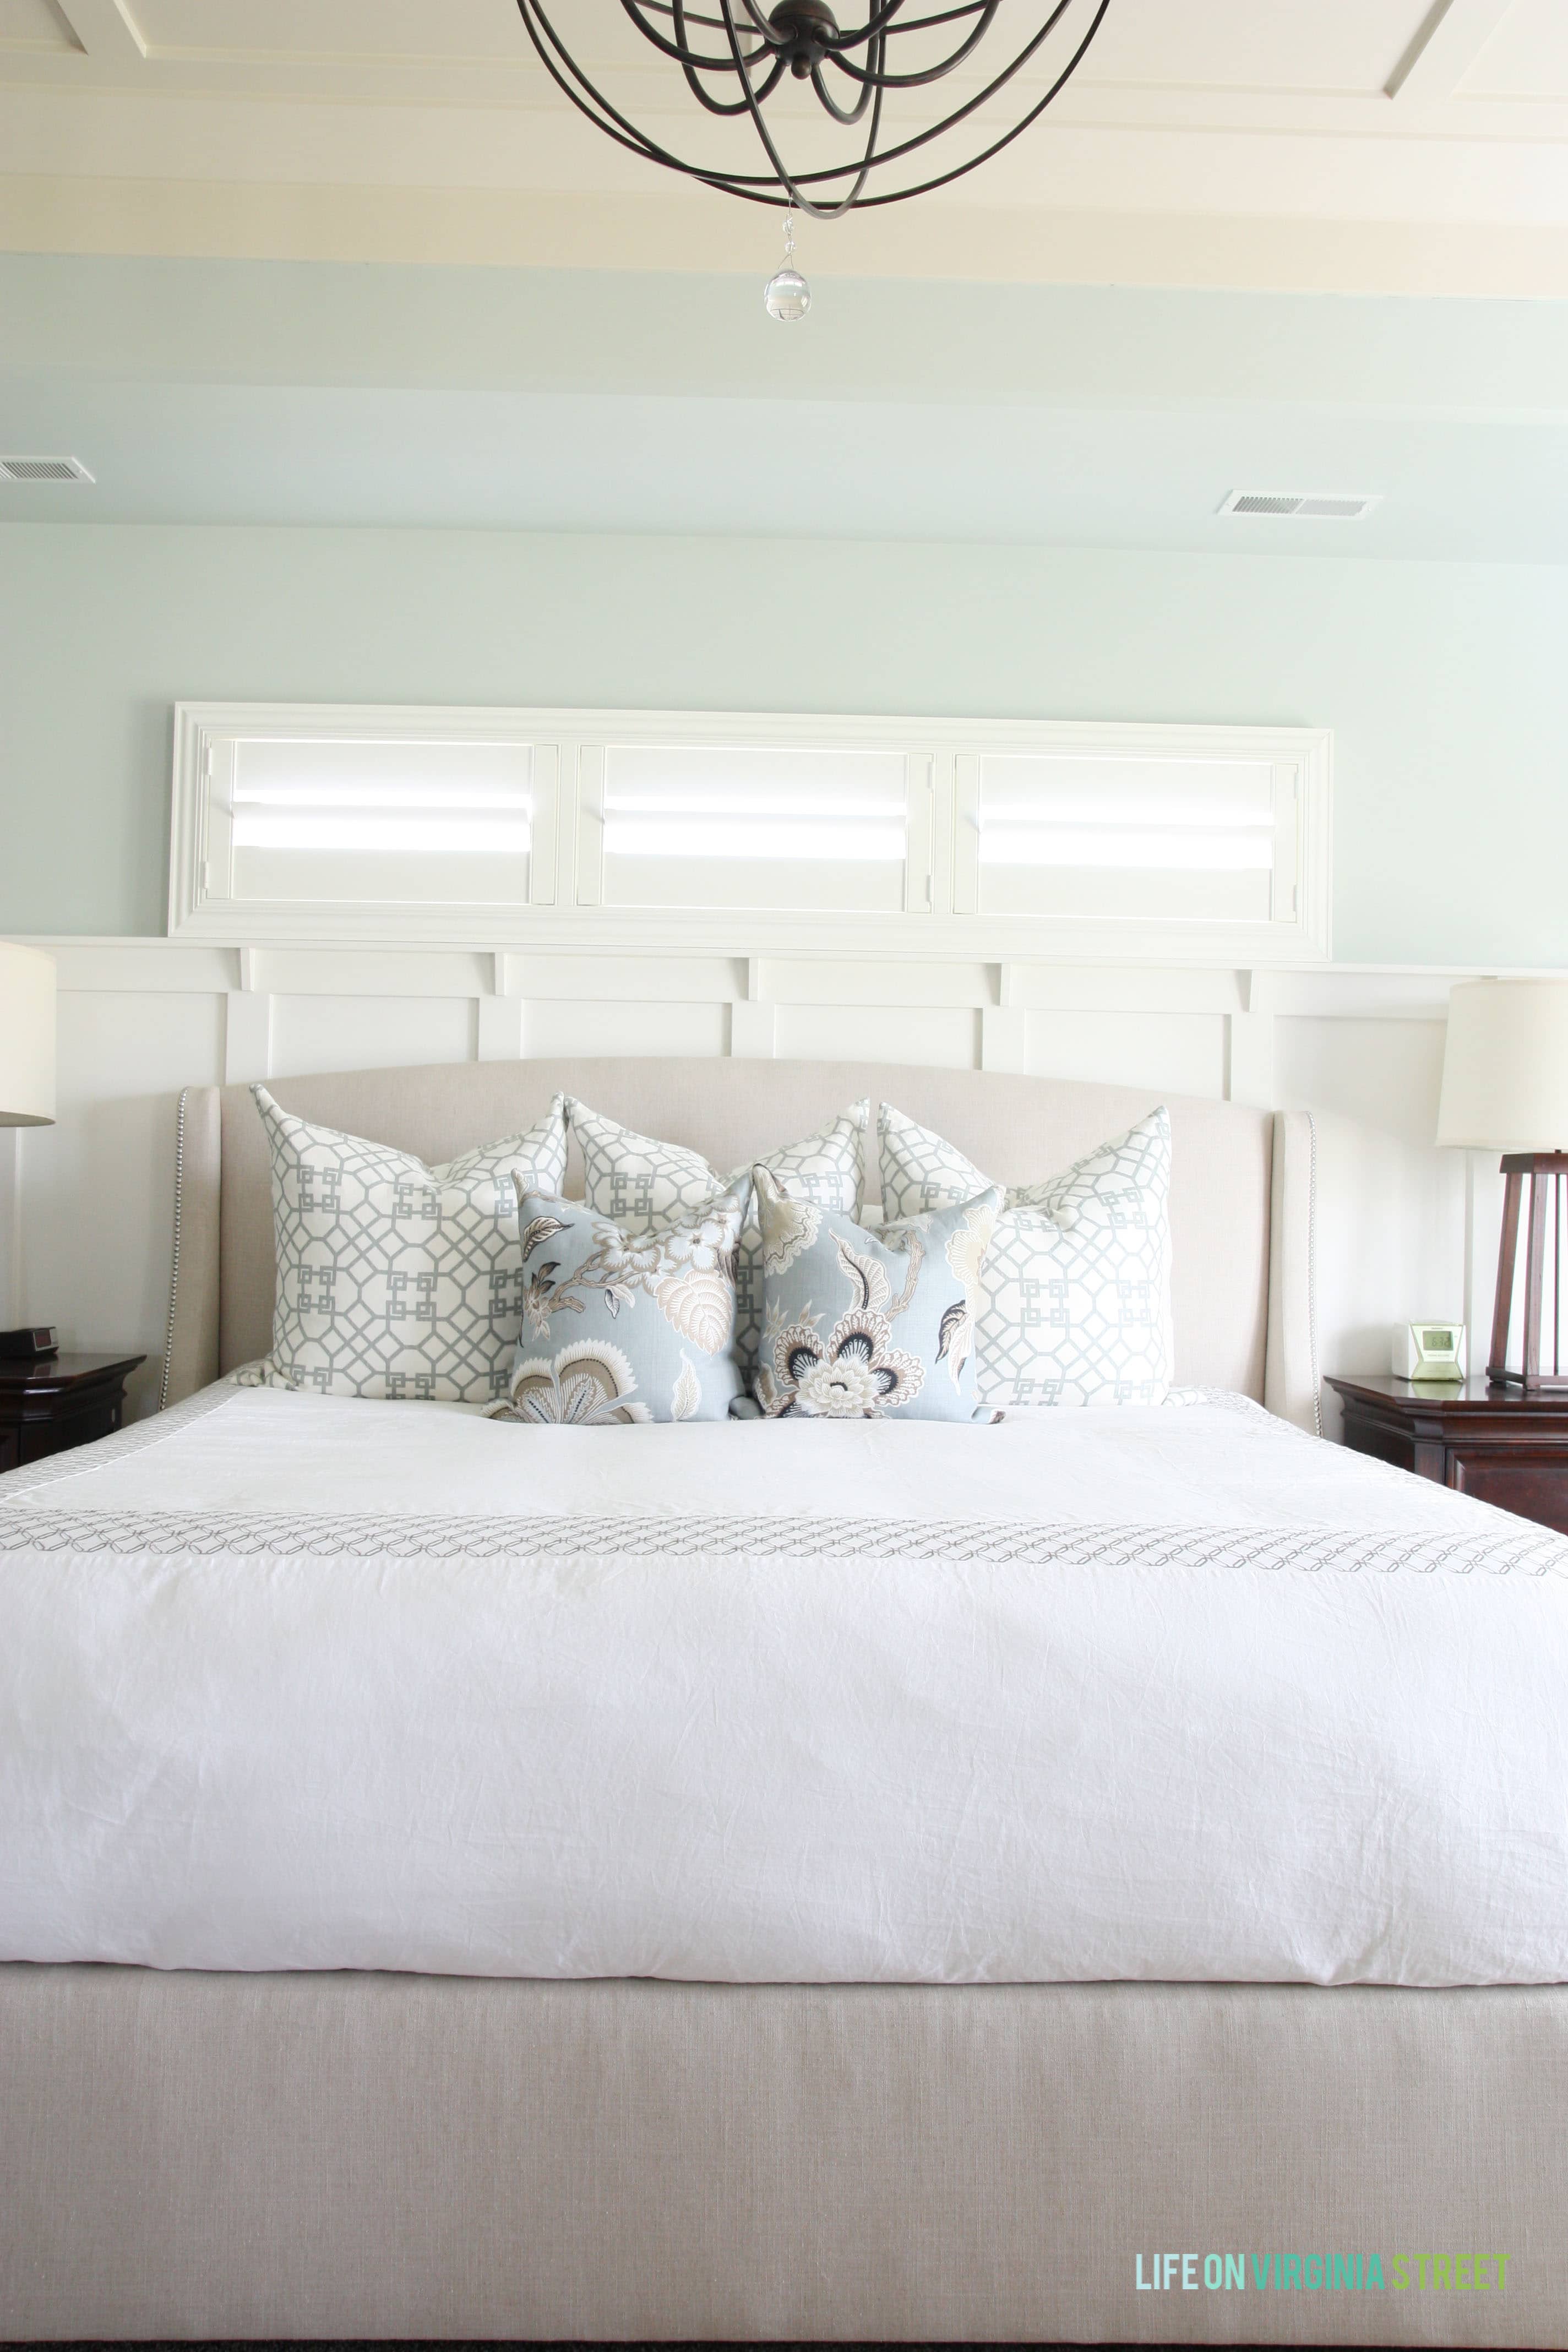 A serene master bedroom with Sherwin Williams Sea Salt walls. Such a pretty green-blue color that gives a spa-like appearance to any room!